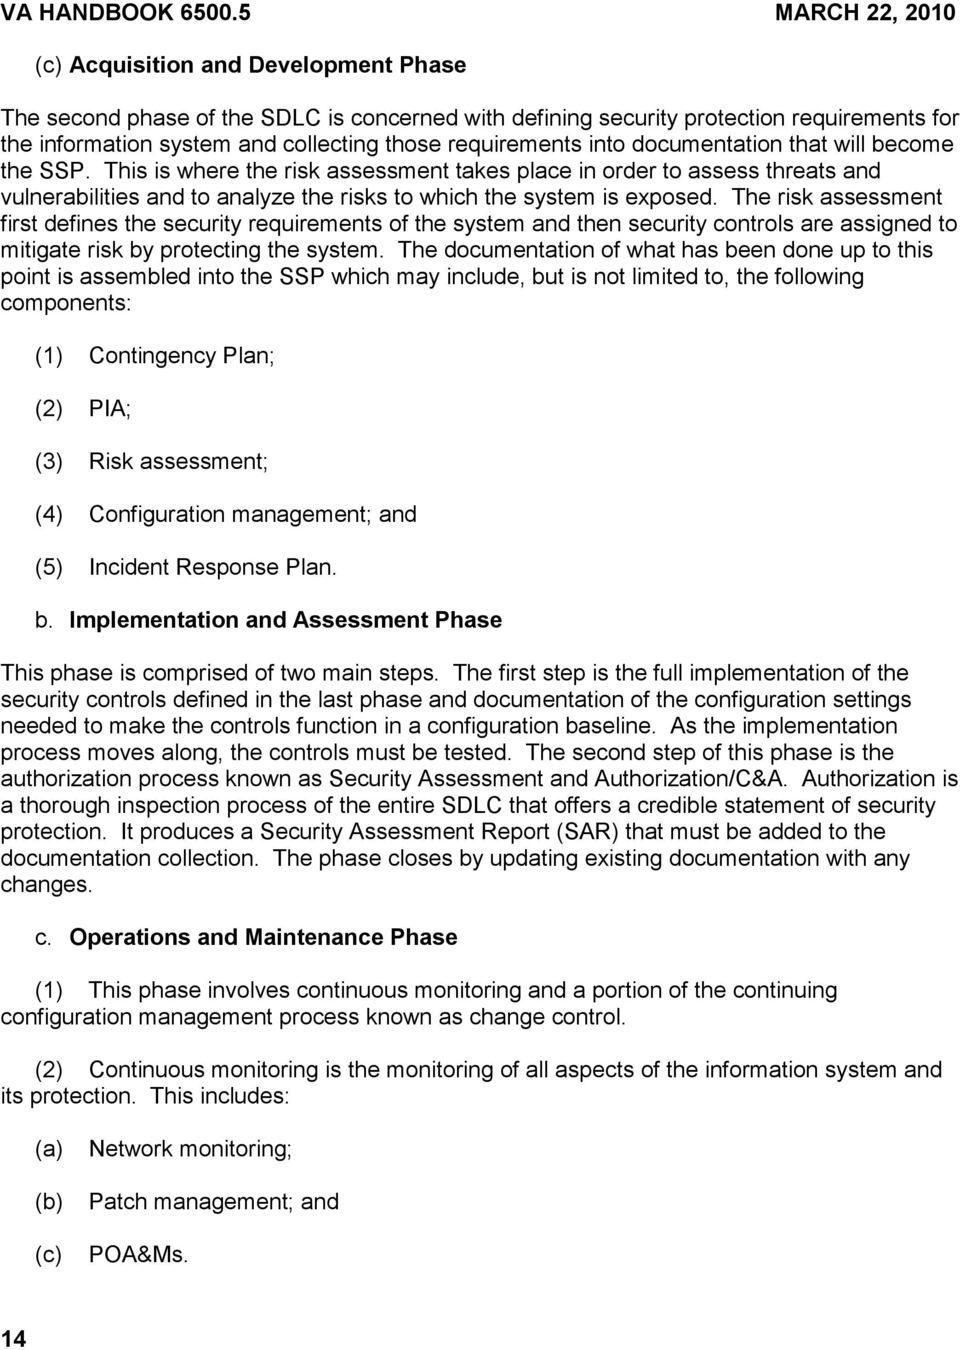 requirements into documentation that will become the SSP.